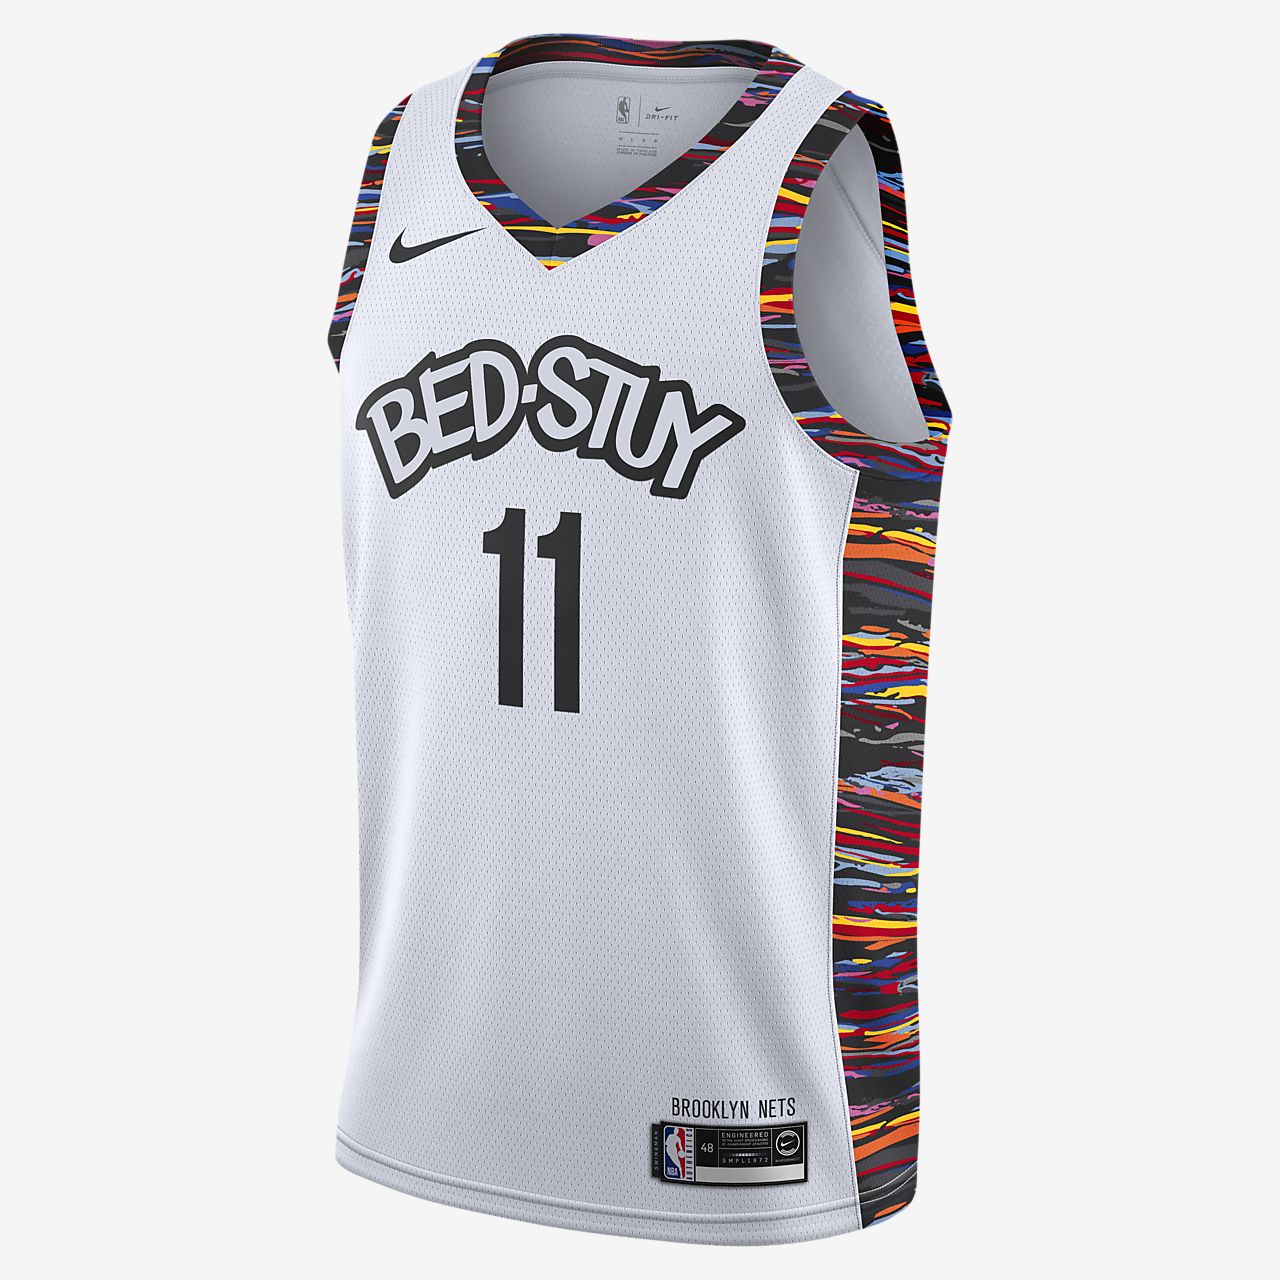 kyrie irving jersey